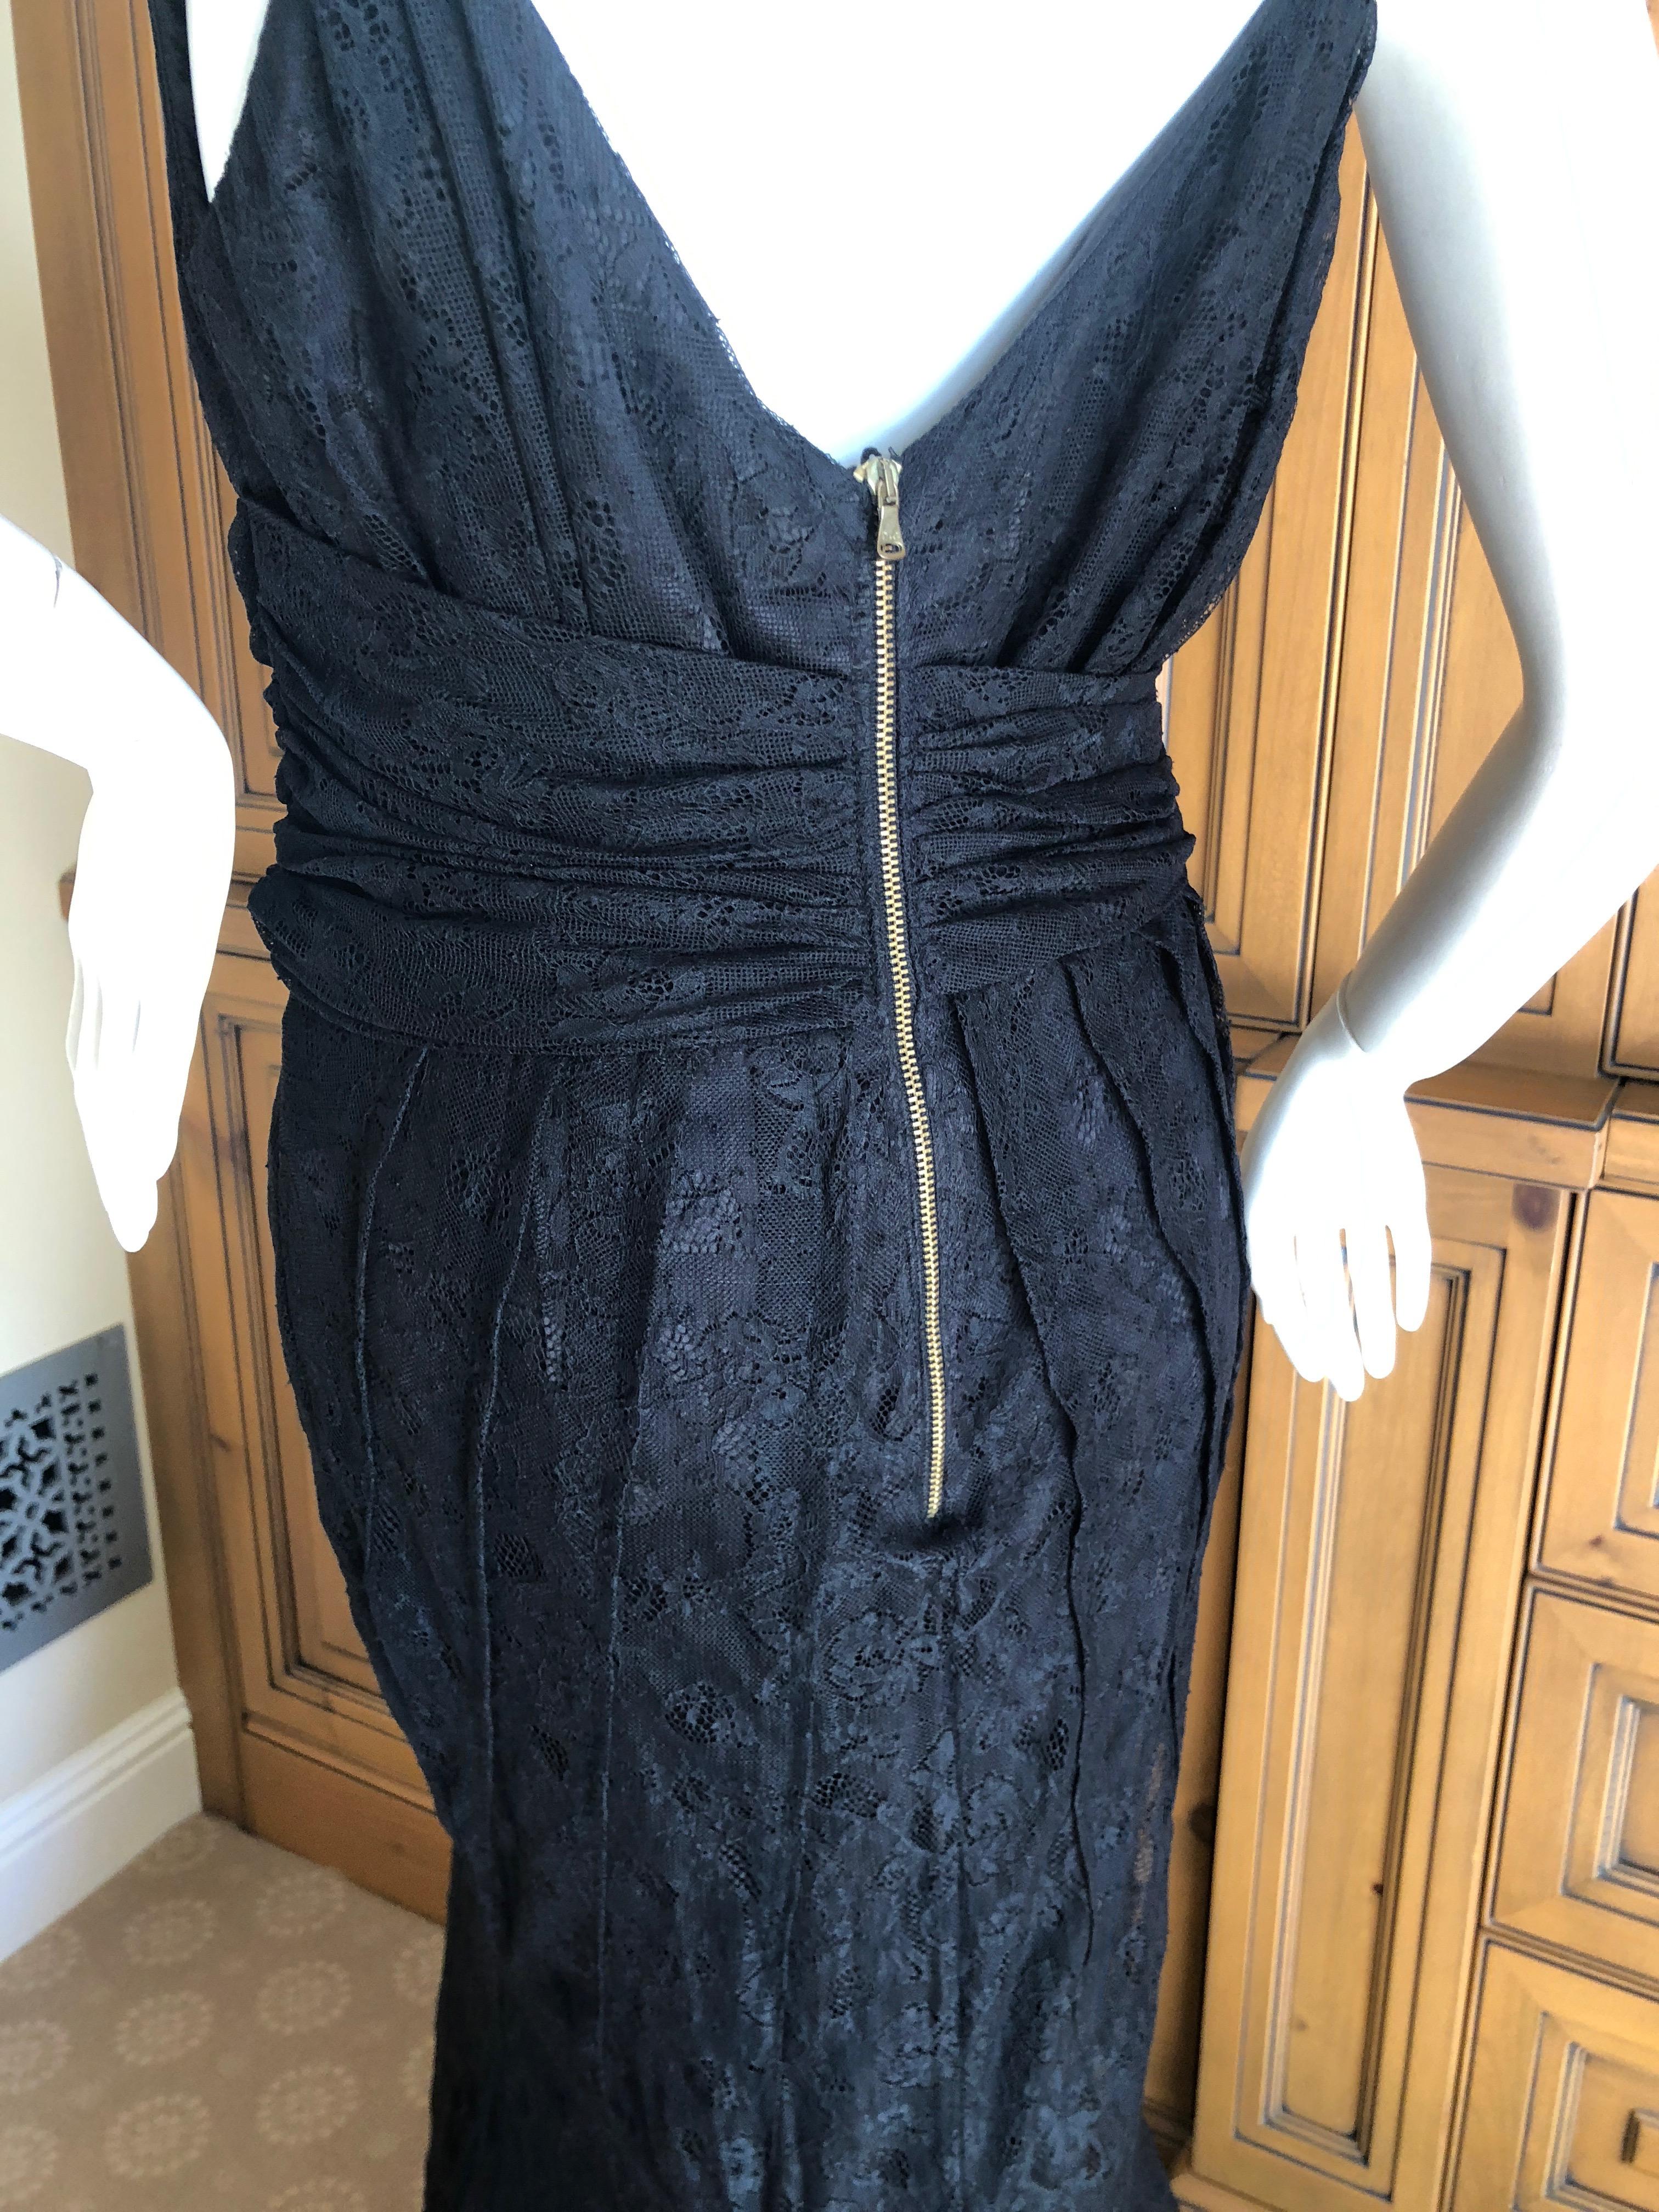 D&G Dolce & Gabbana Sheer Black Lace Vintage Evening Dress with Train For Sale 5